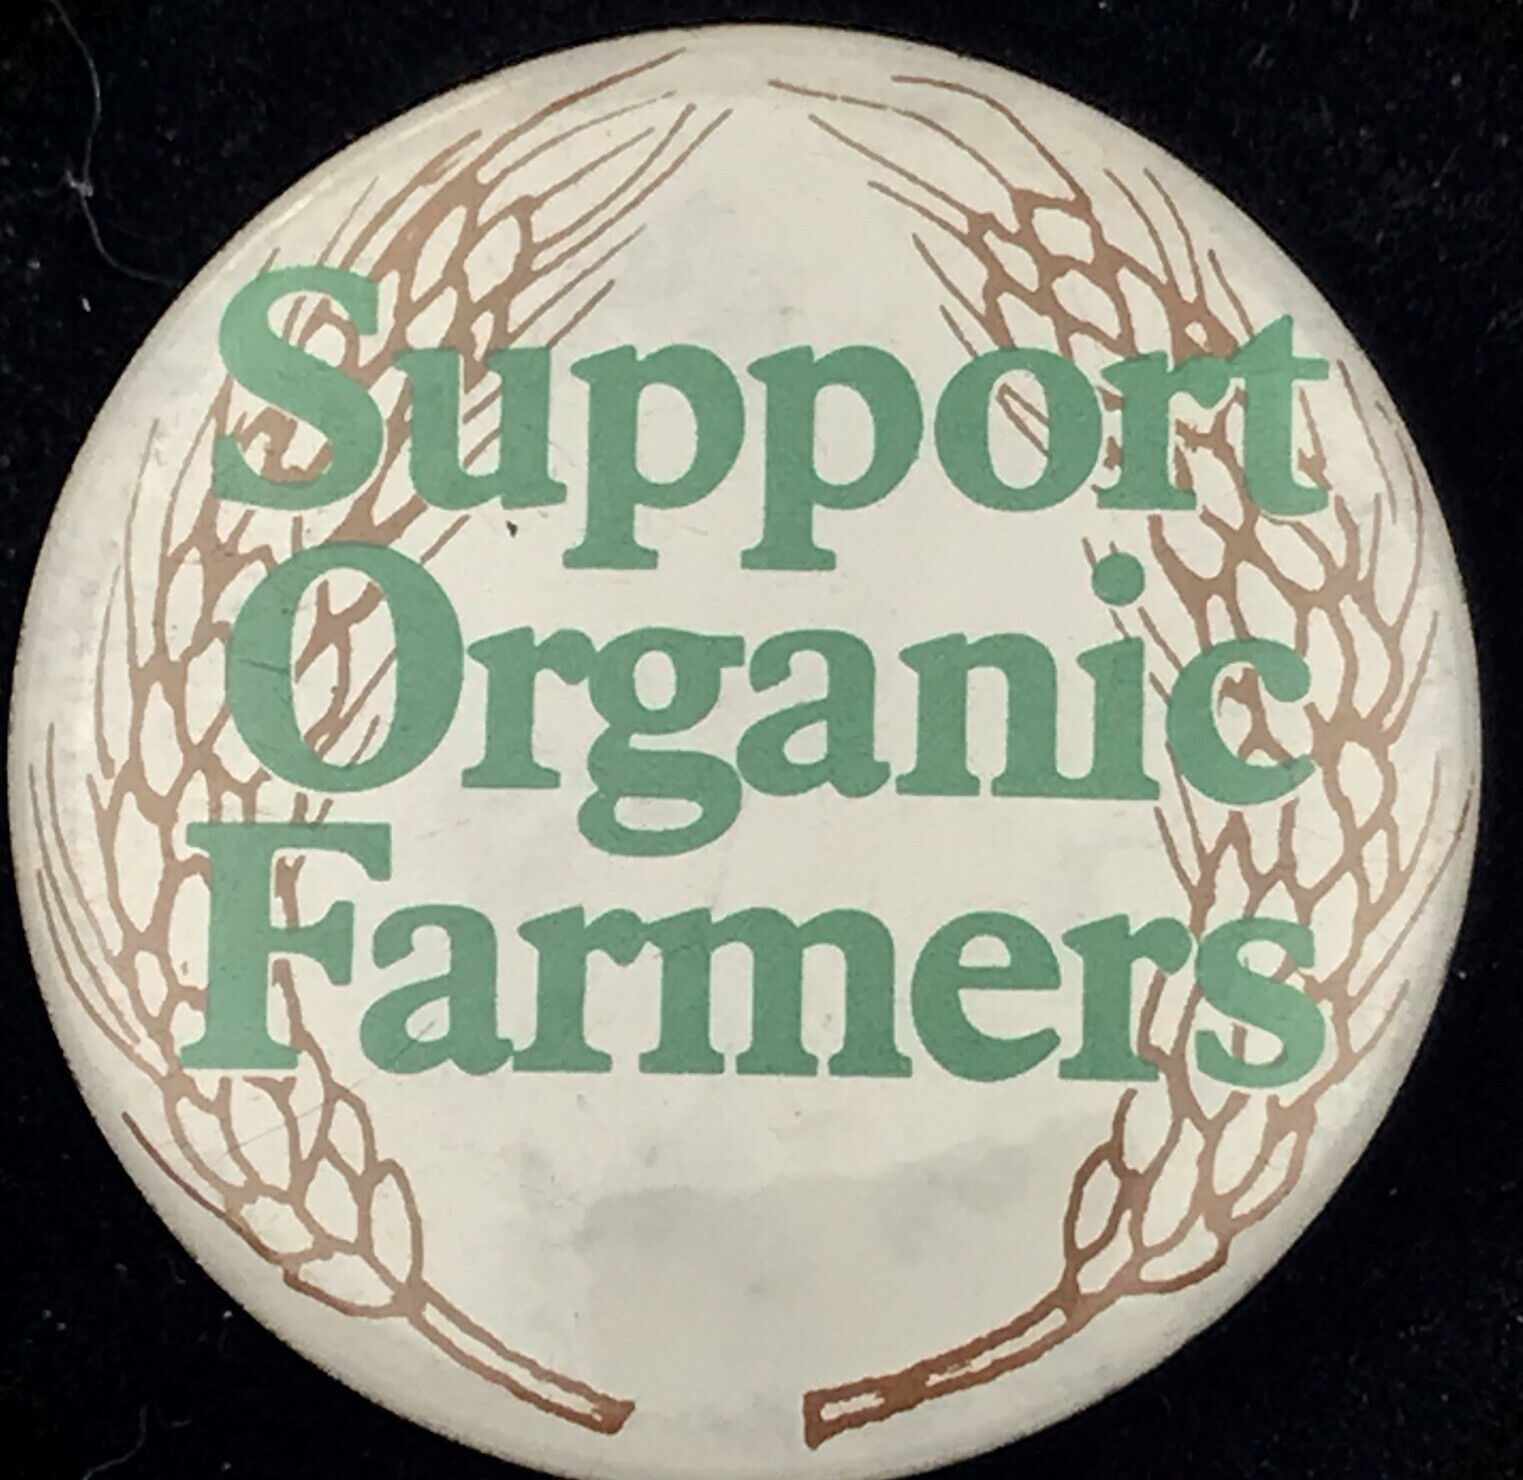 Support Organic Farmers Pin Button Vintage Pin back Healthy Food Nutrition